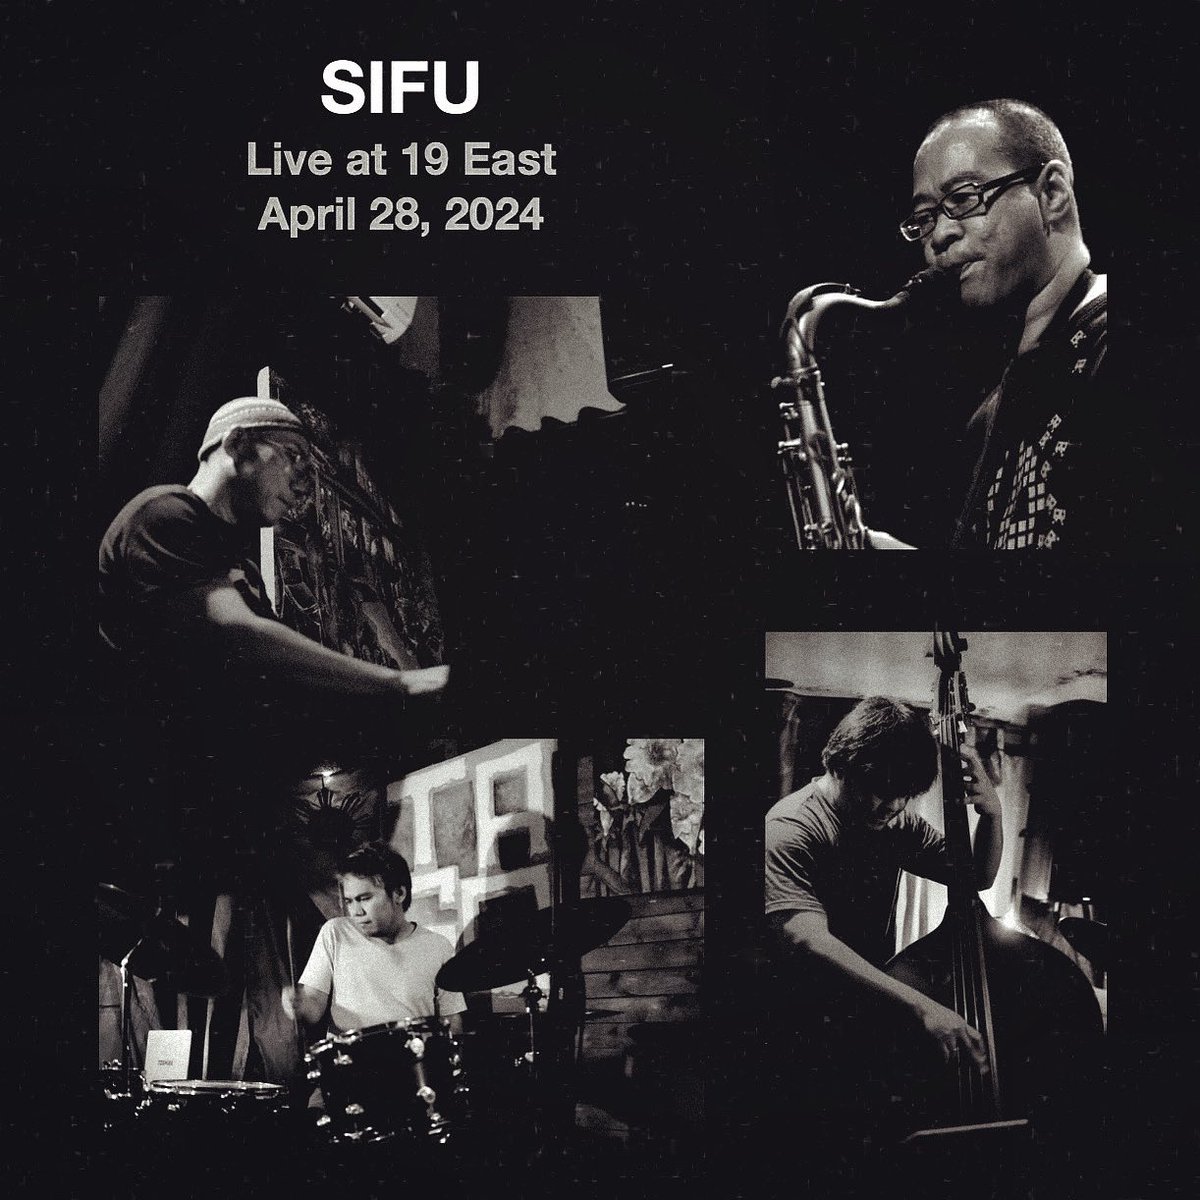 Sifu is an instrumental jazz group. Catch them showcase their arrangements of jazz standards and bebop tunes tonight, April 28. Doors open at 7pm. Show starts around 9pm. Seating is first-come, first-served. No entrance fee. It's a free show. Bring everyone!